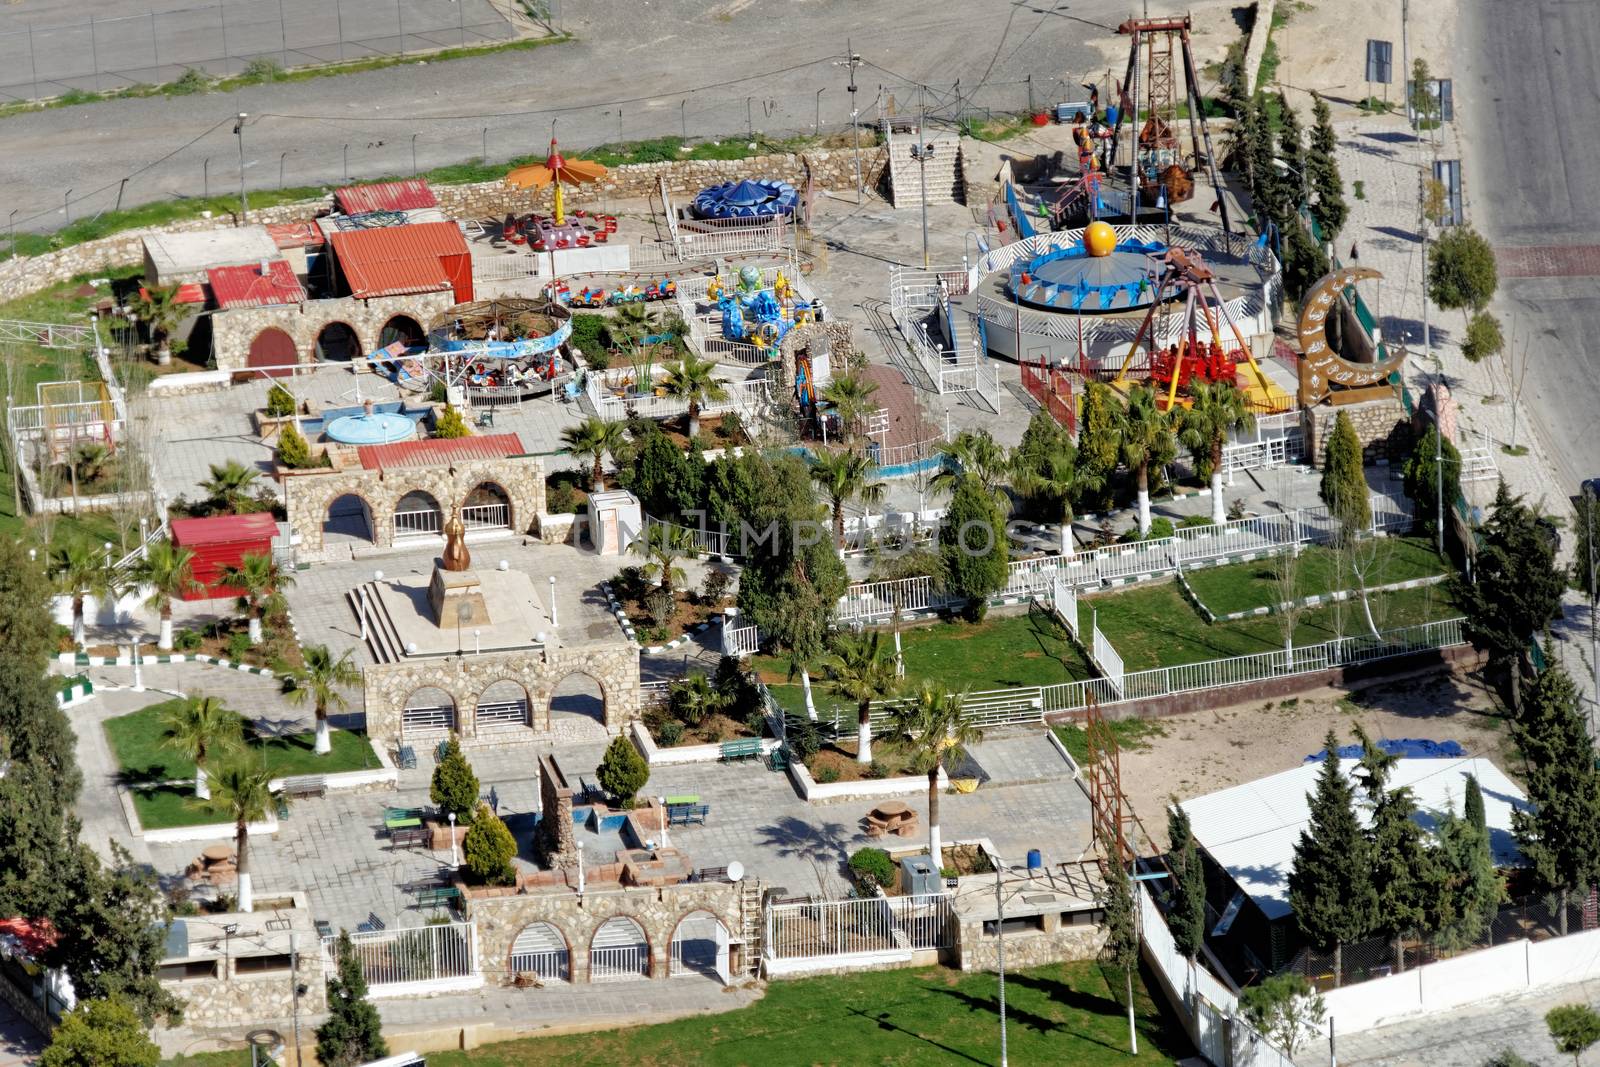 View from above of a small amusement park with play equipment for children on the edge of Karak, Jordan by geogif